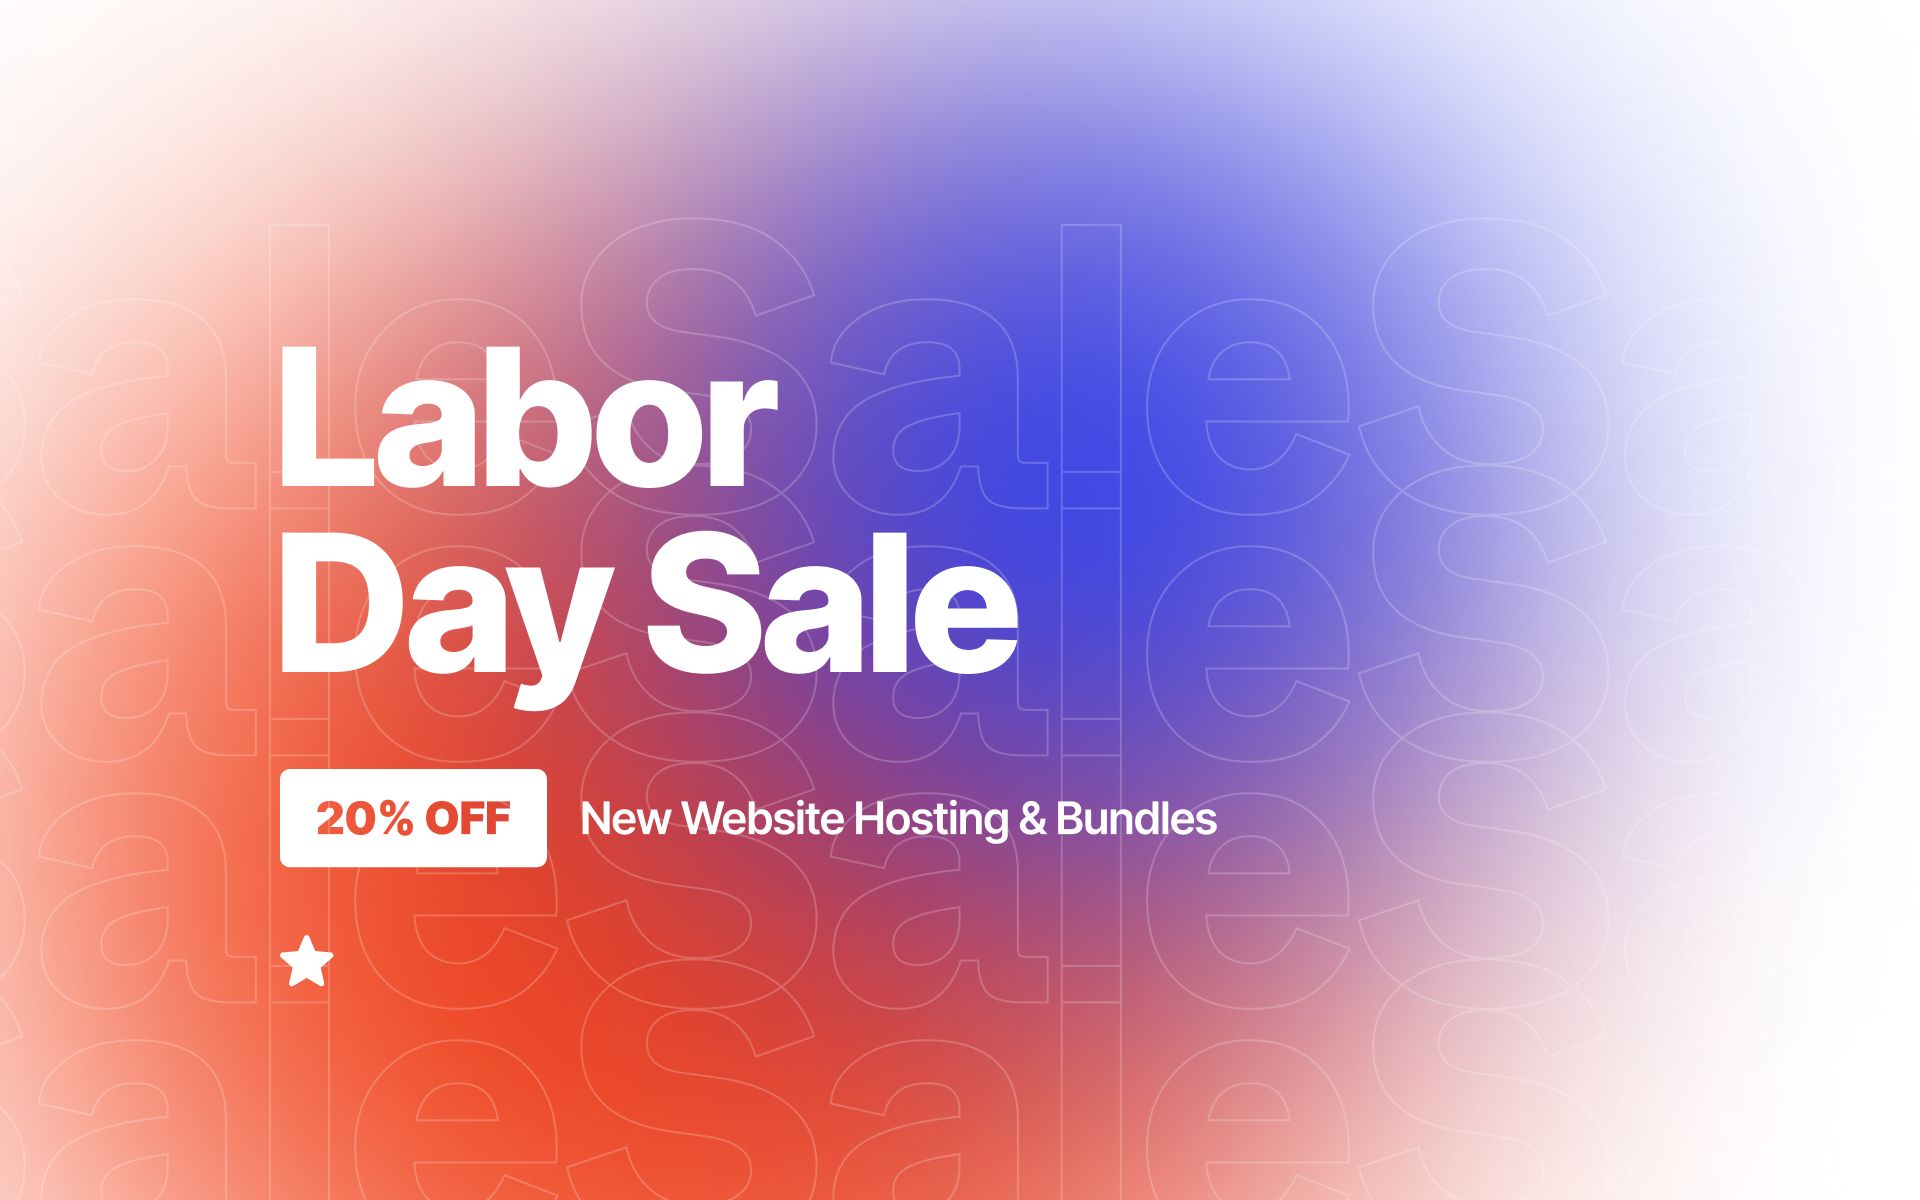 Labor Day Sale from Without Code